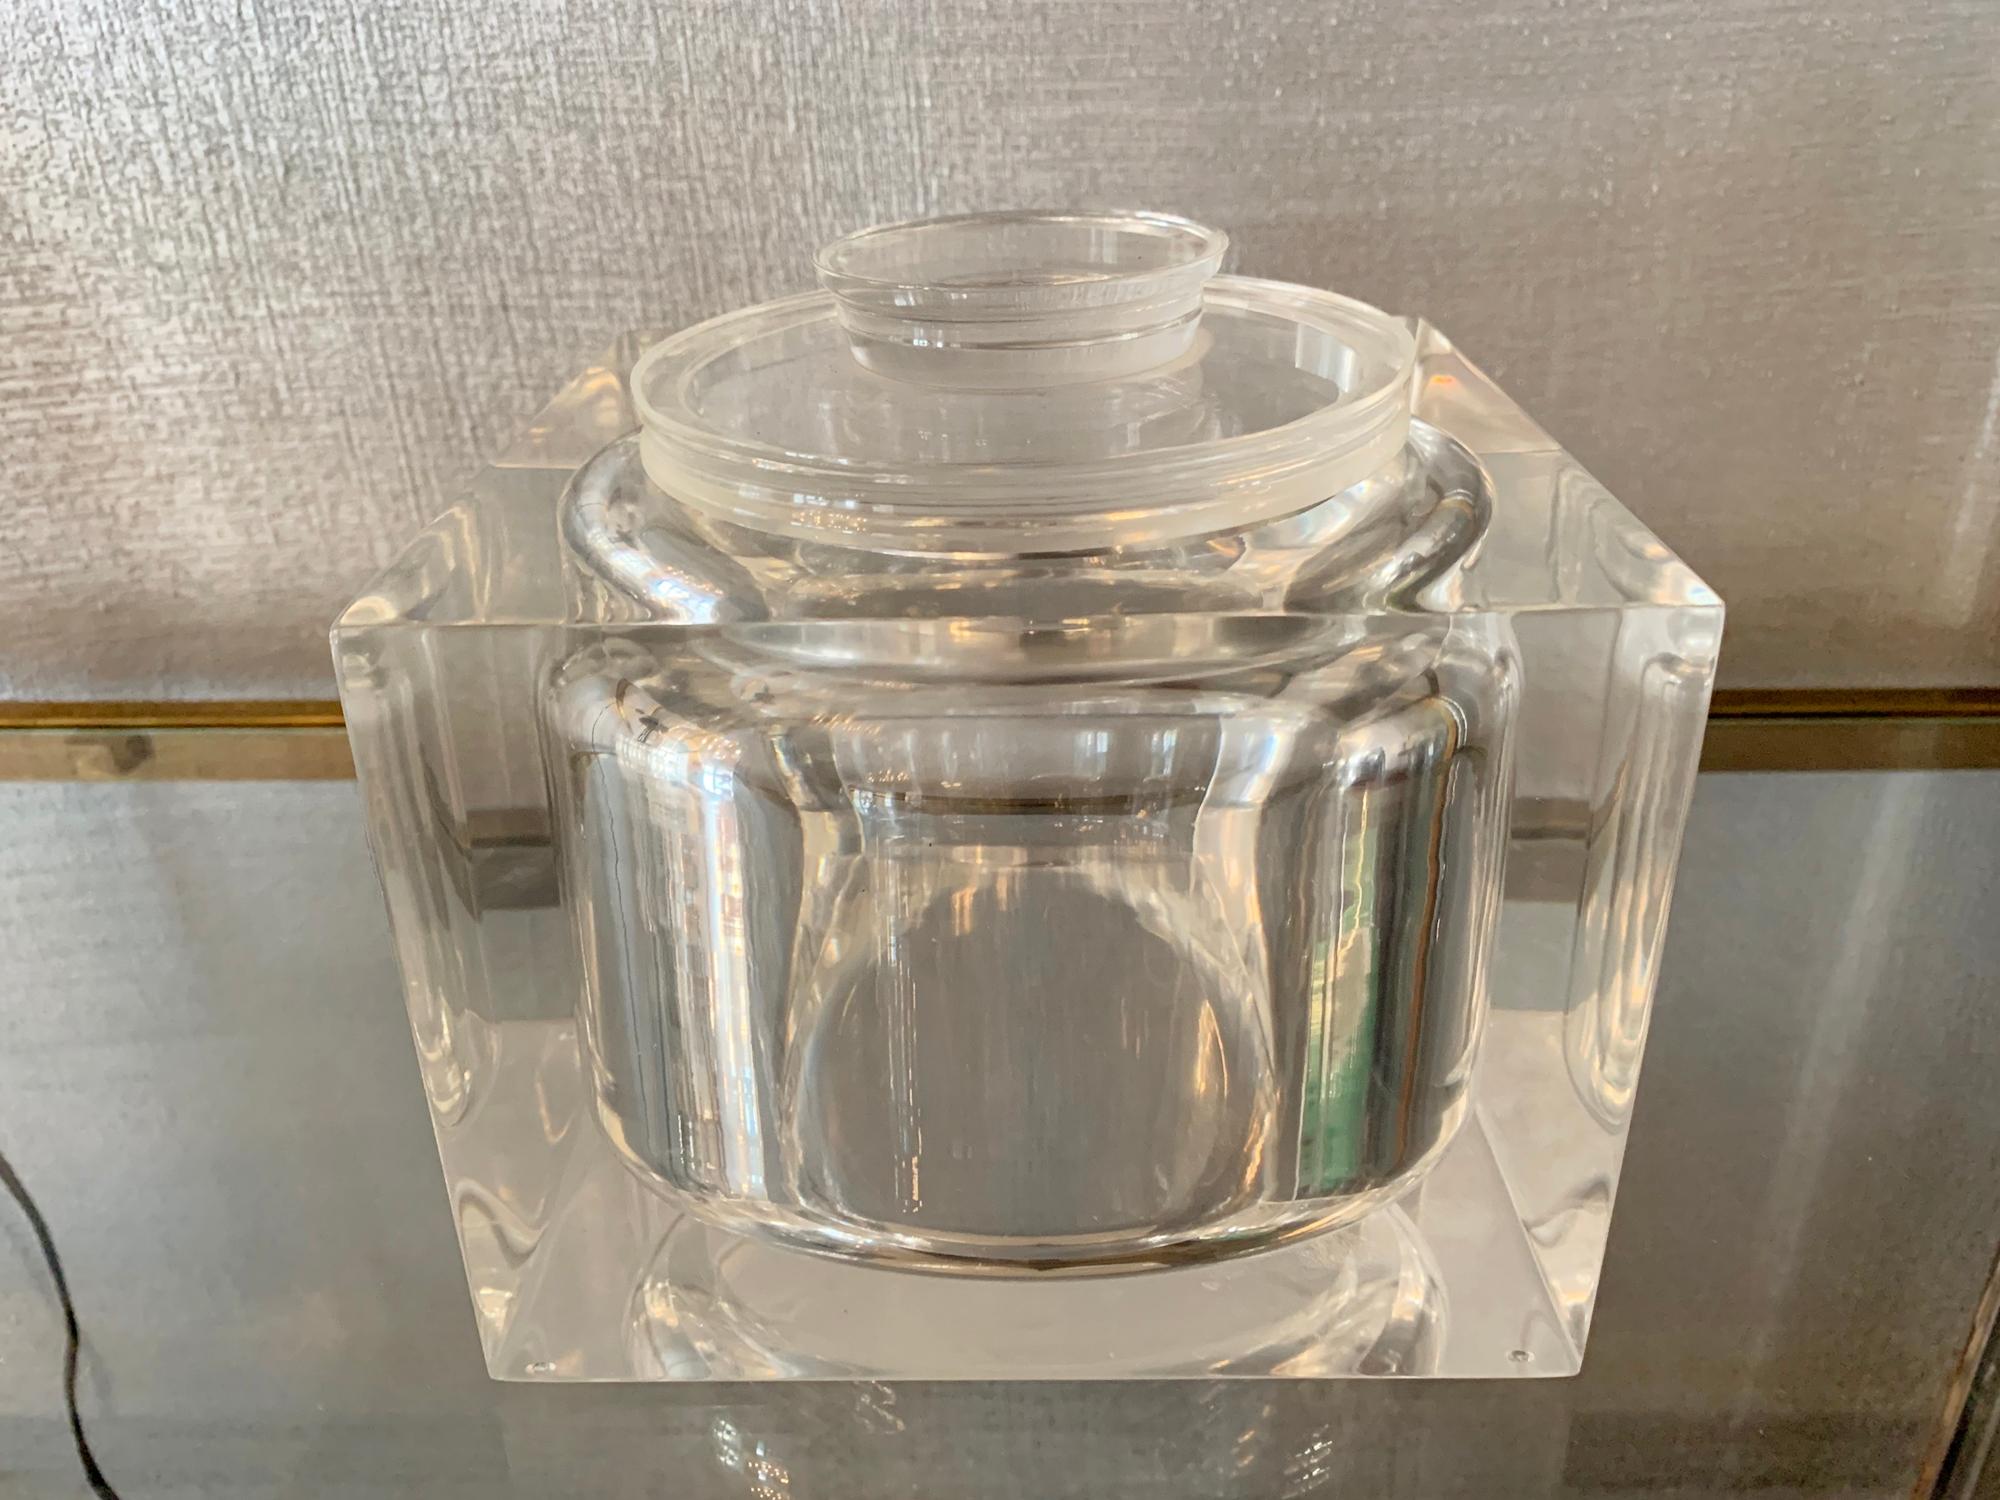 Beautiful Lucite bucket from the 190s in very good condition, free of chips or cracks.
Measurements: 6.5